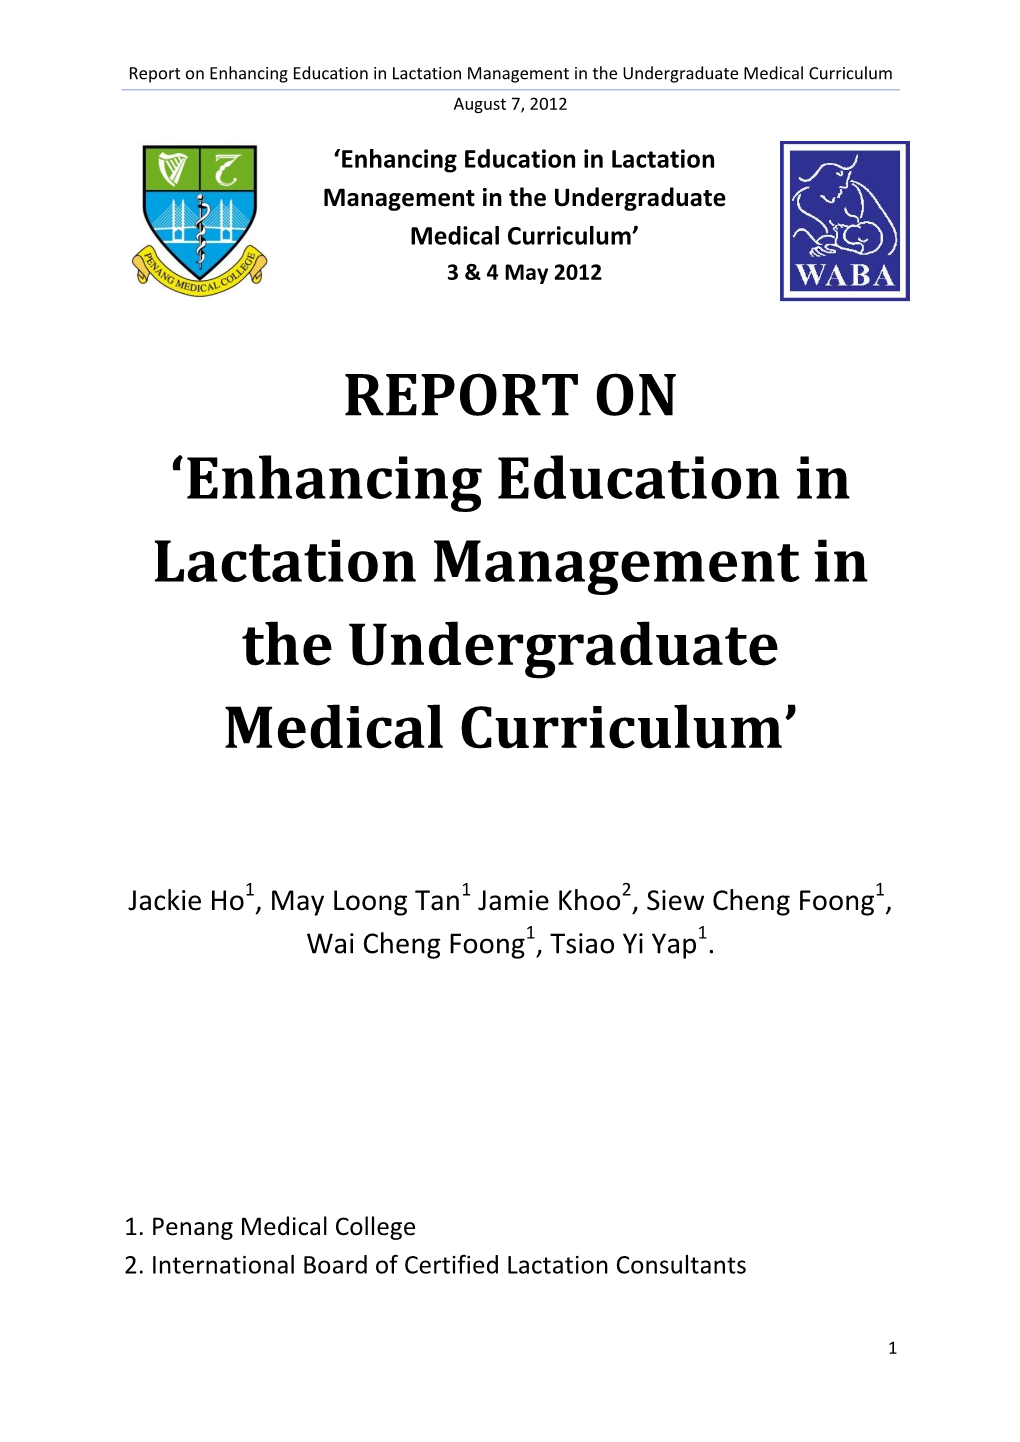 Enhancing Education in Lactation Management in the Undergraduate Medical Curriculum August 7, 2012